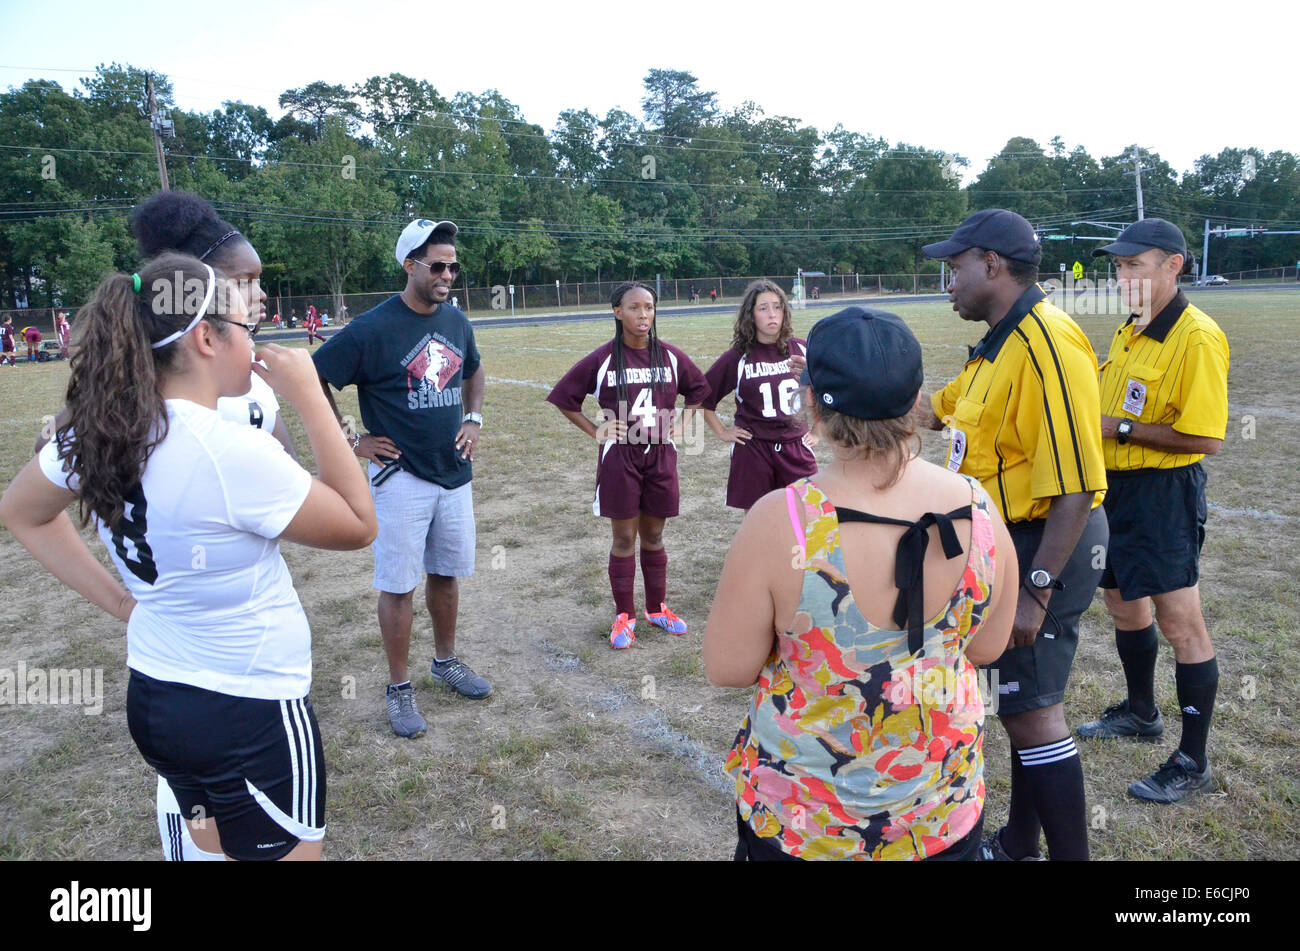 Soccer teams and coaches meet with referees prior to the beginning of a high school soccer game Stock Photo